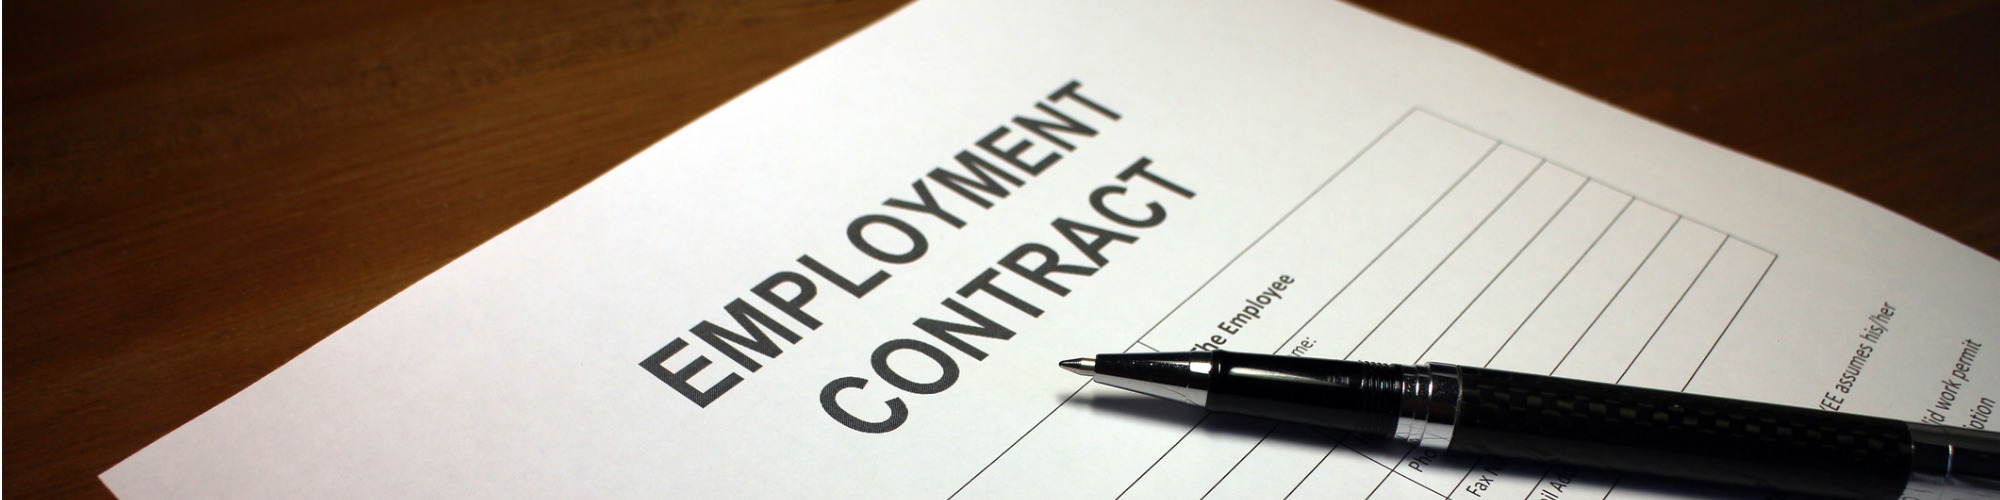 Employment Law Update - Recent Key Changes Explored